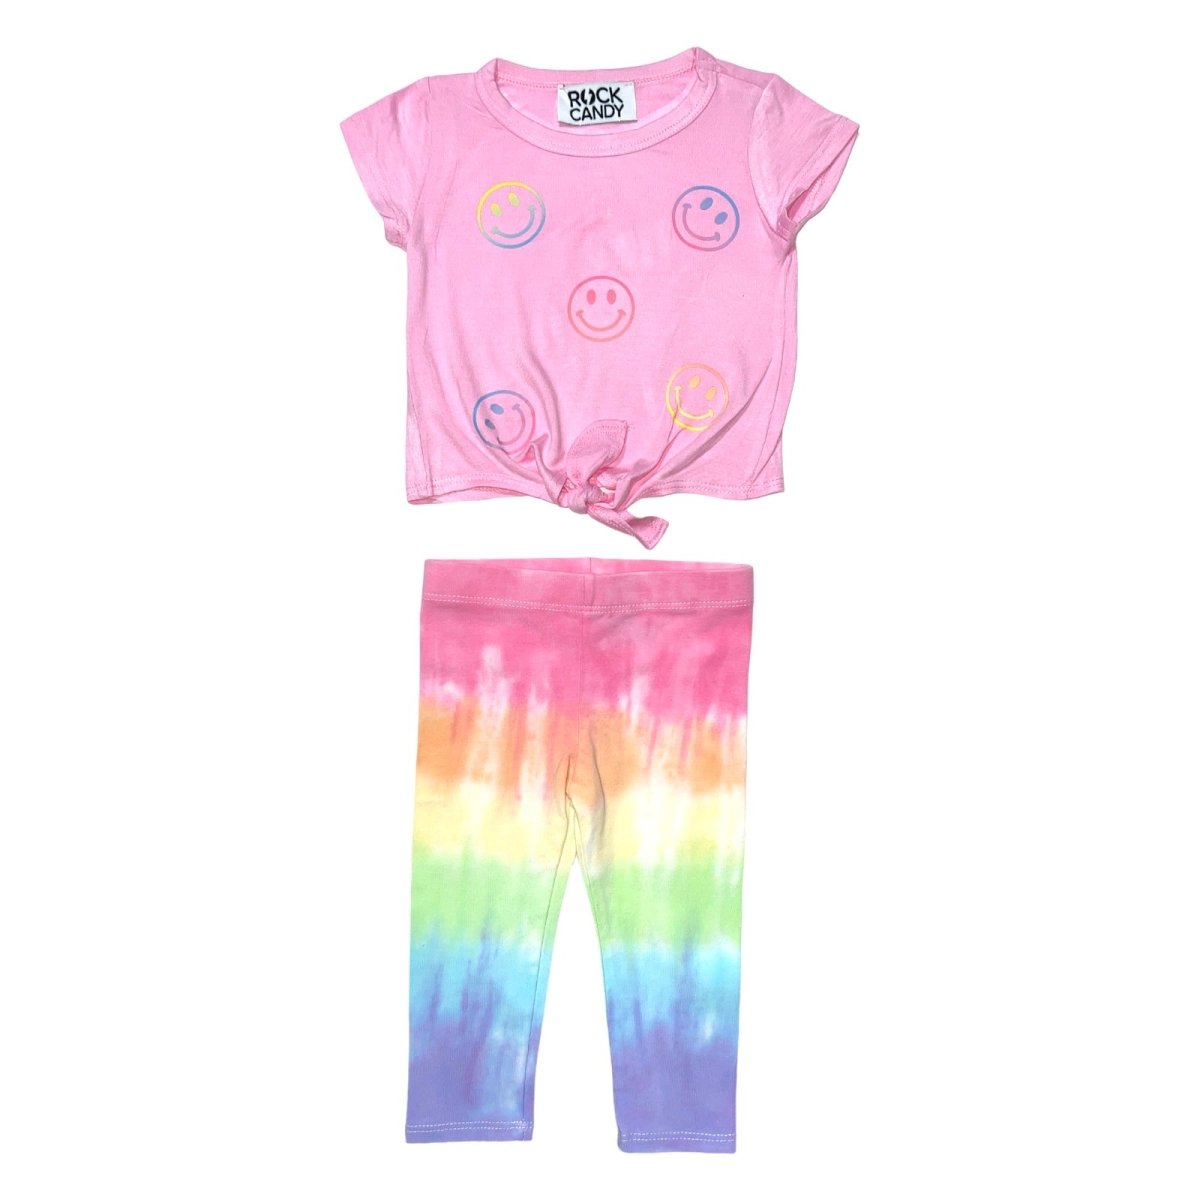 NEON SMILEY FACE TSHIRT AND TIE DYE LEGGINGS SET - ROCK CANDY